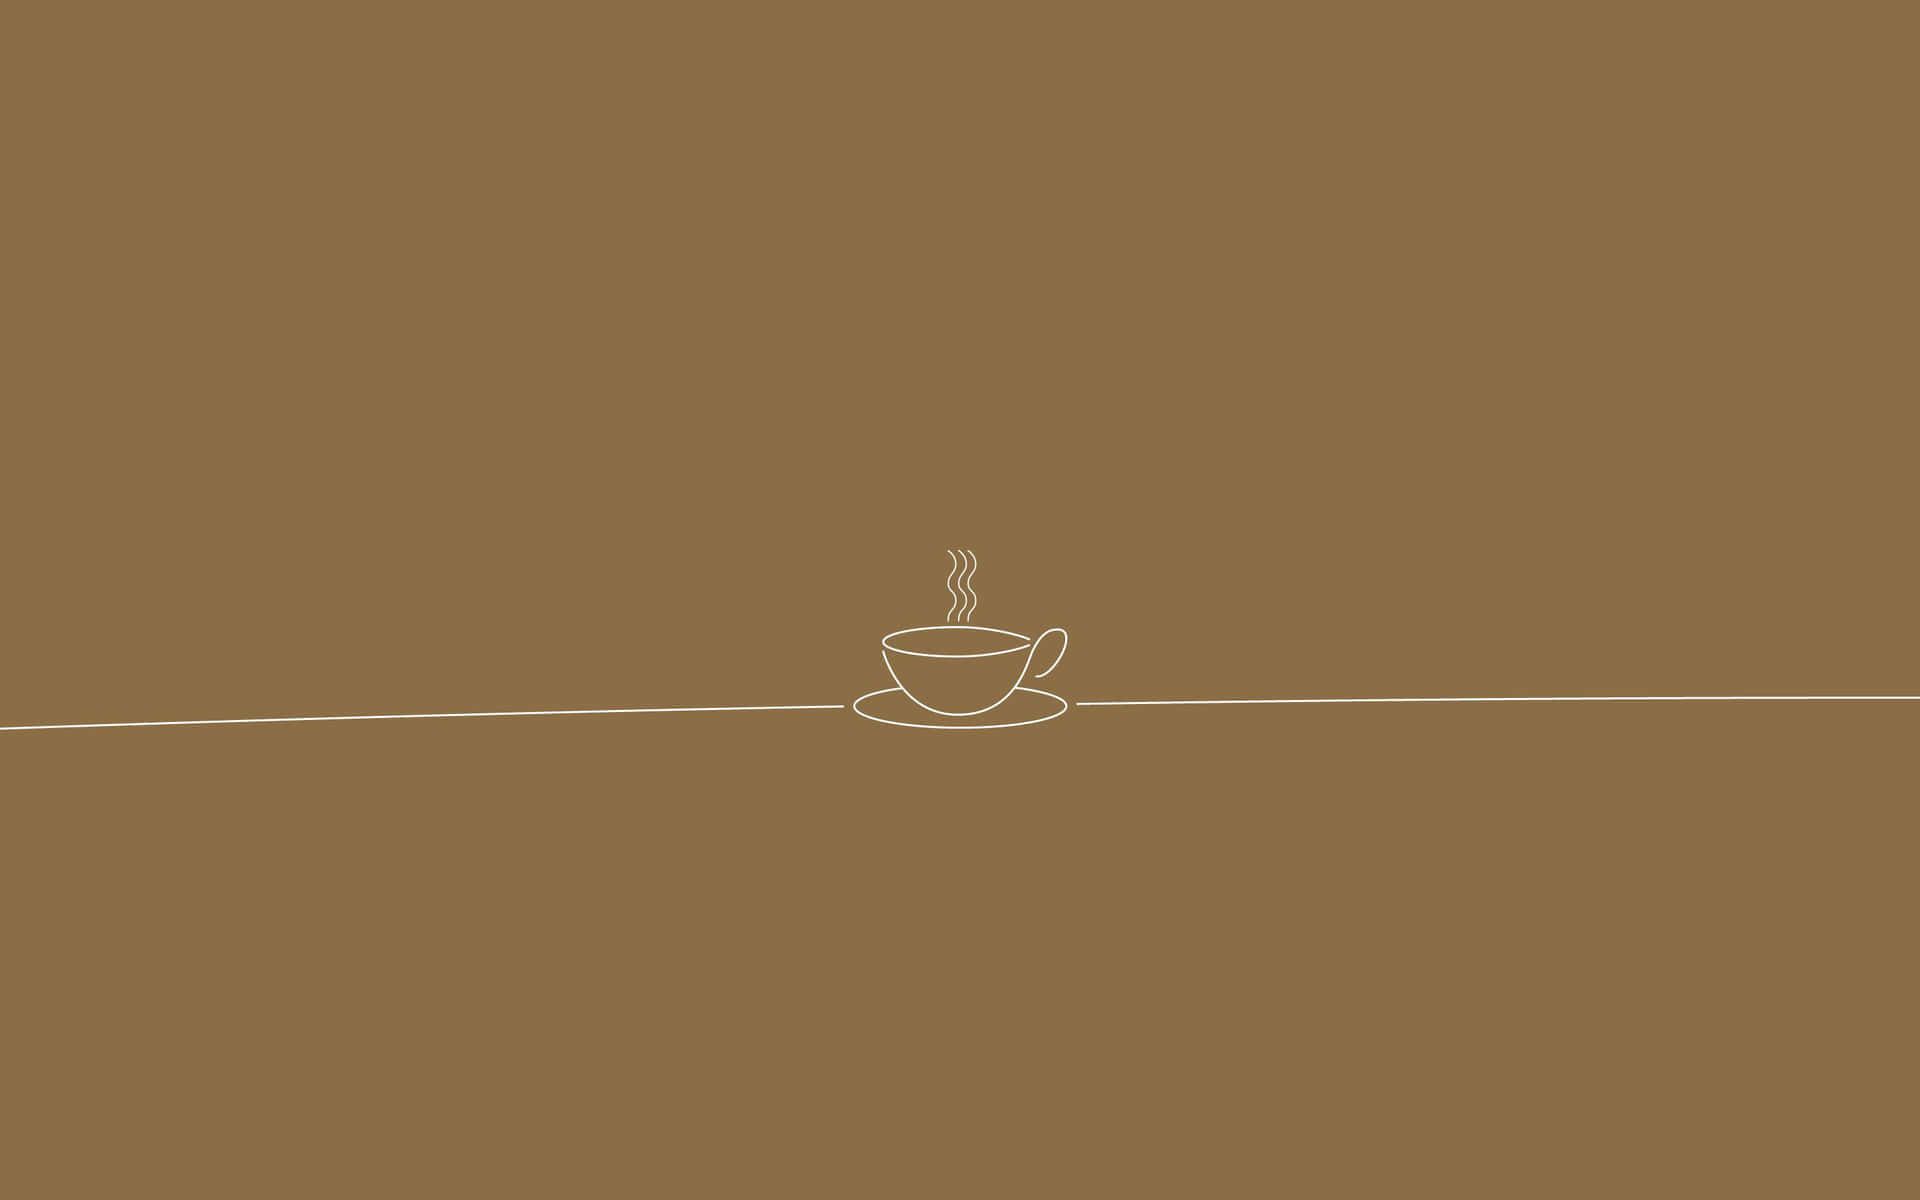 Continuous line drawing of a cup of coffee - 1920x1200